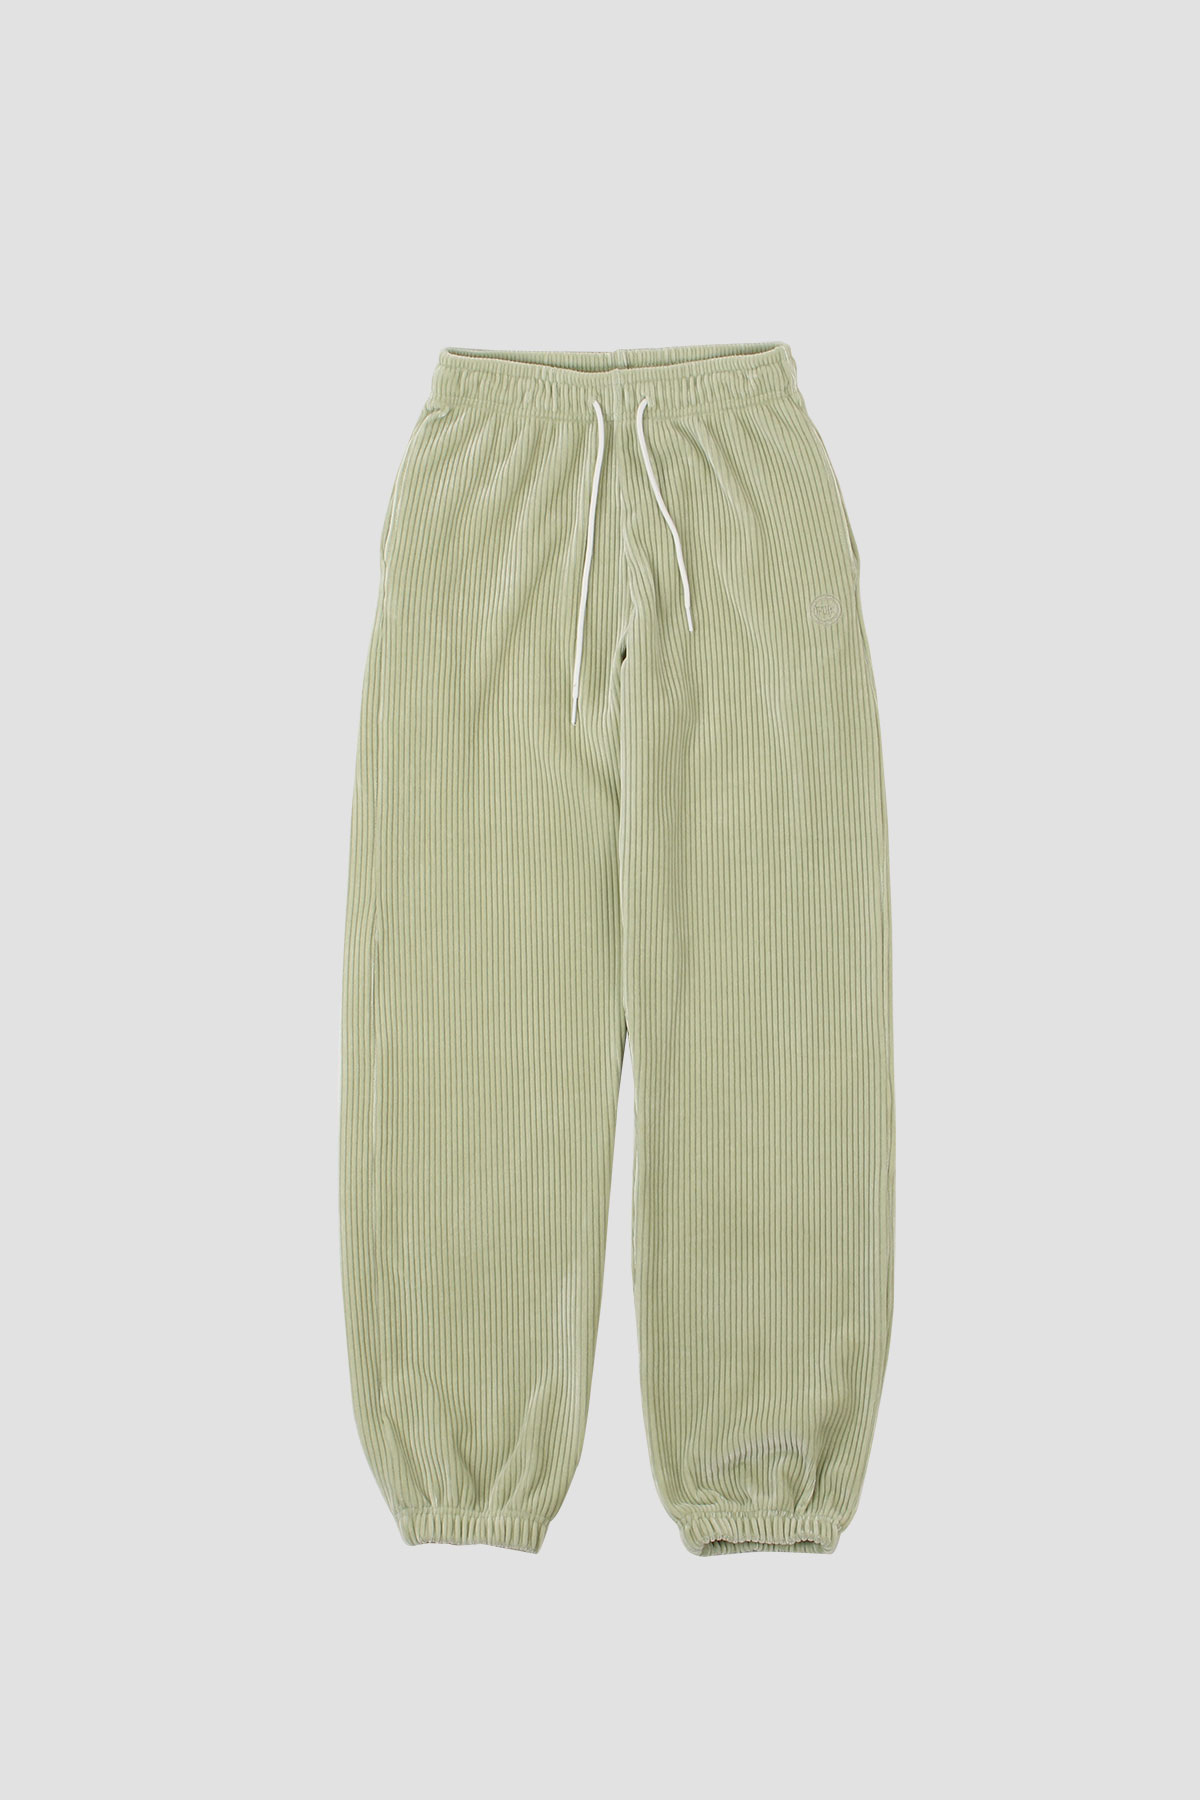 FOR HER. VELOUR JOGGER PANTS 11차